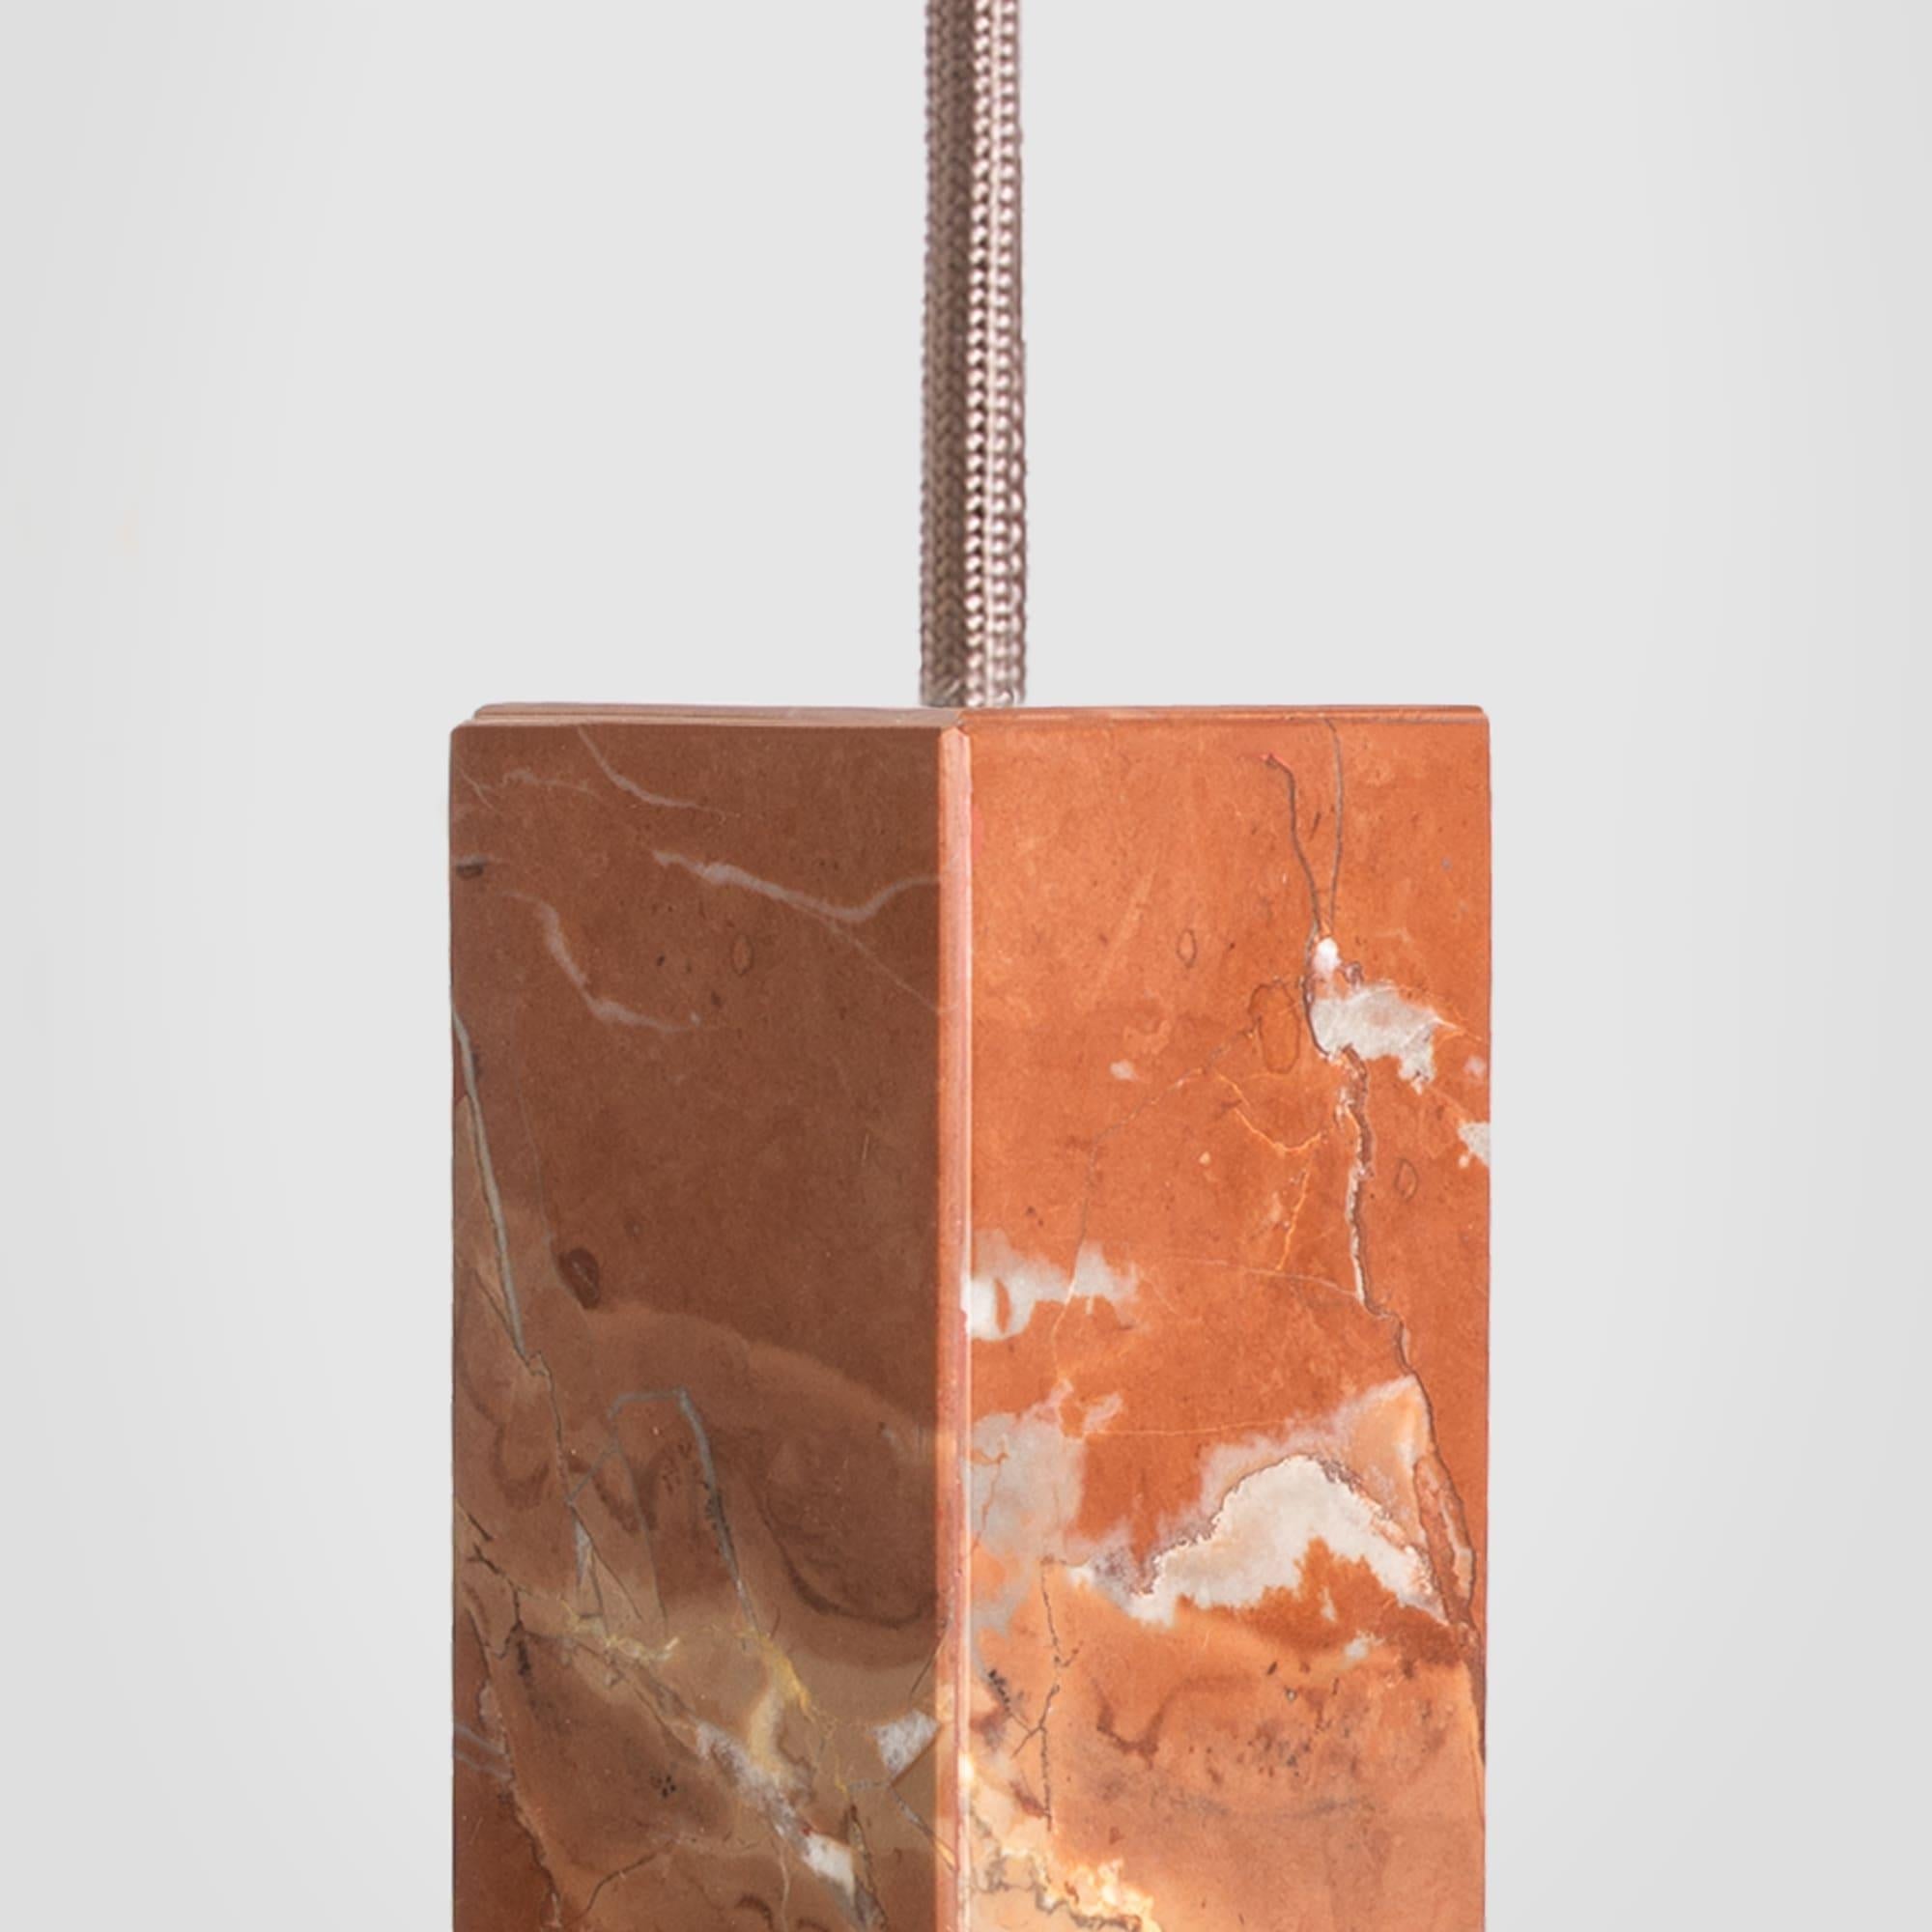 Contemporary Marble Lamp One Color Edition by Formaminima For Sale